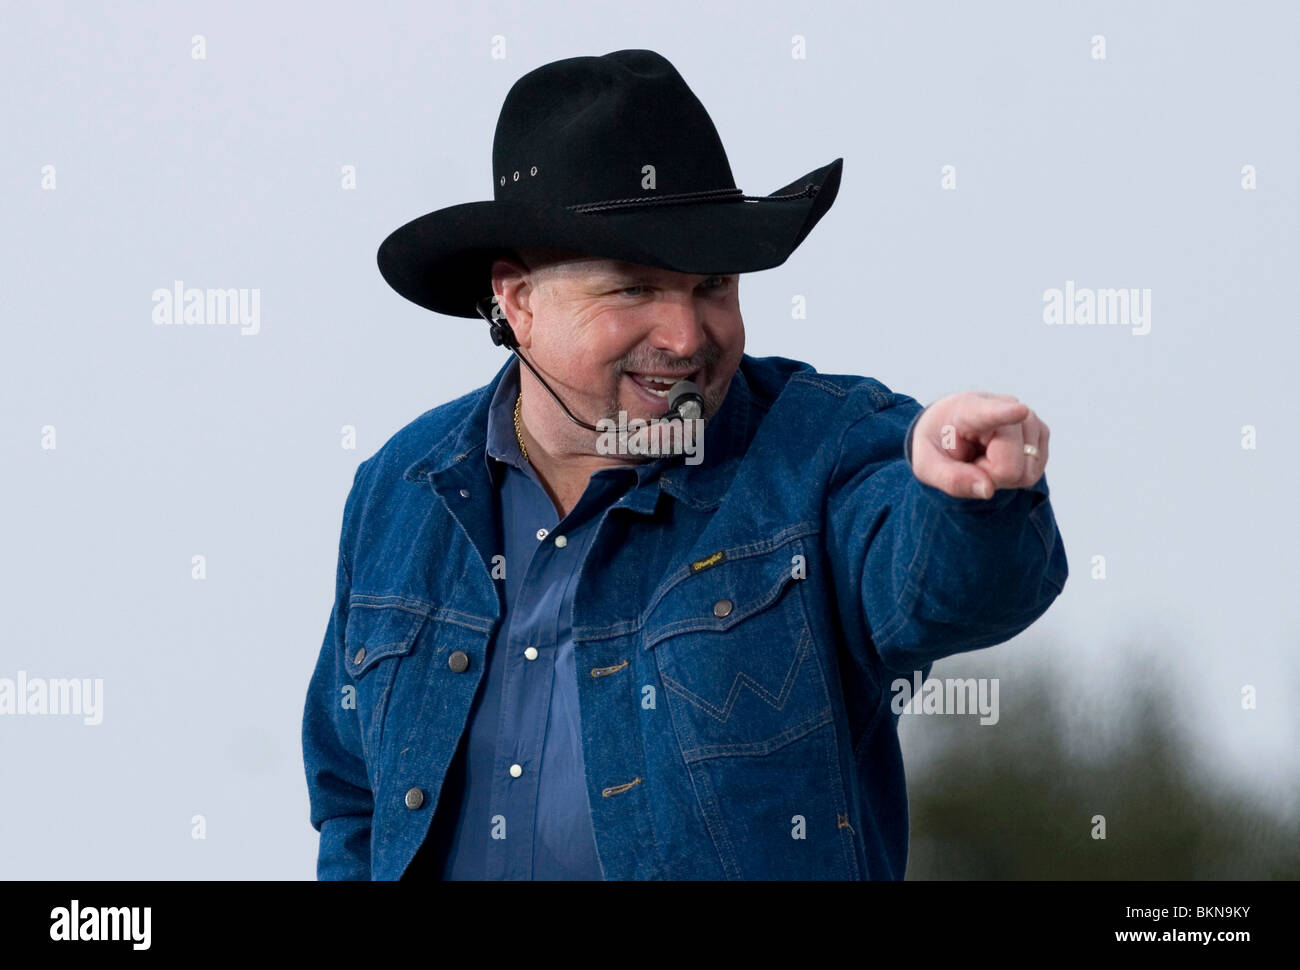 Garth Brooks Performs at the We Are One Concert. Stock Photo